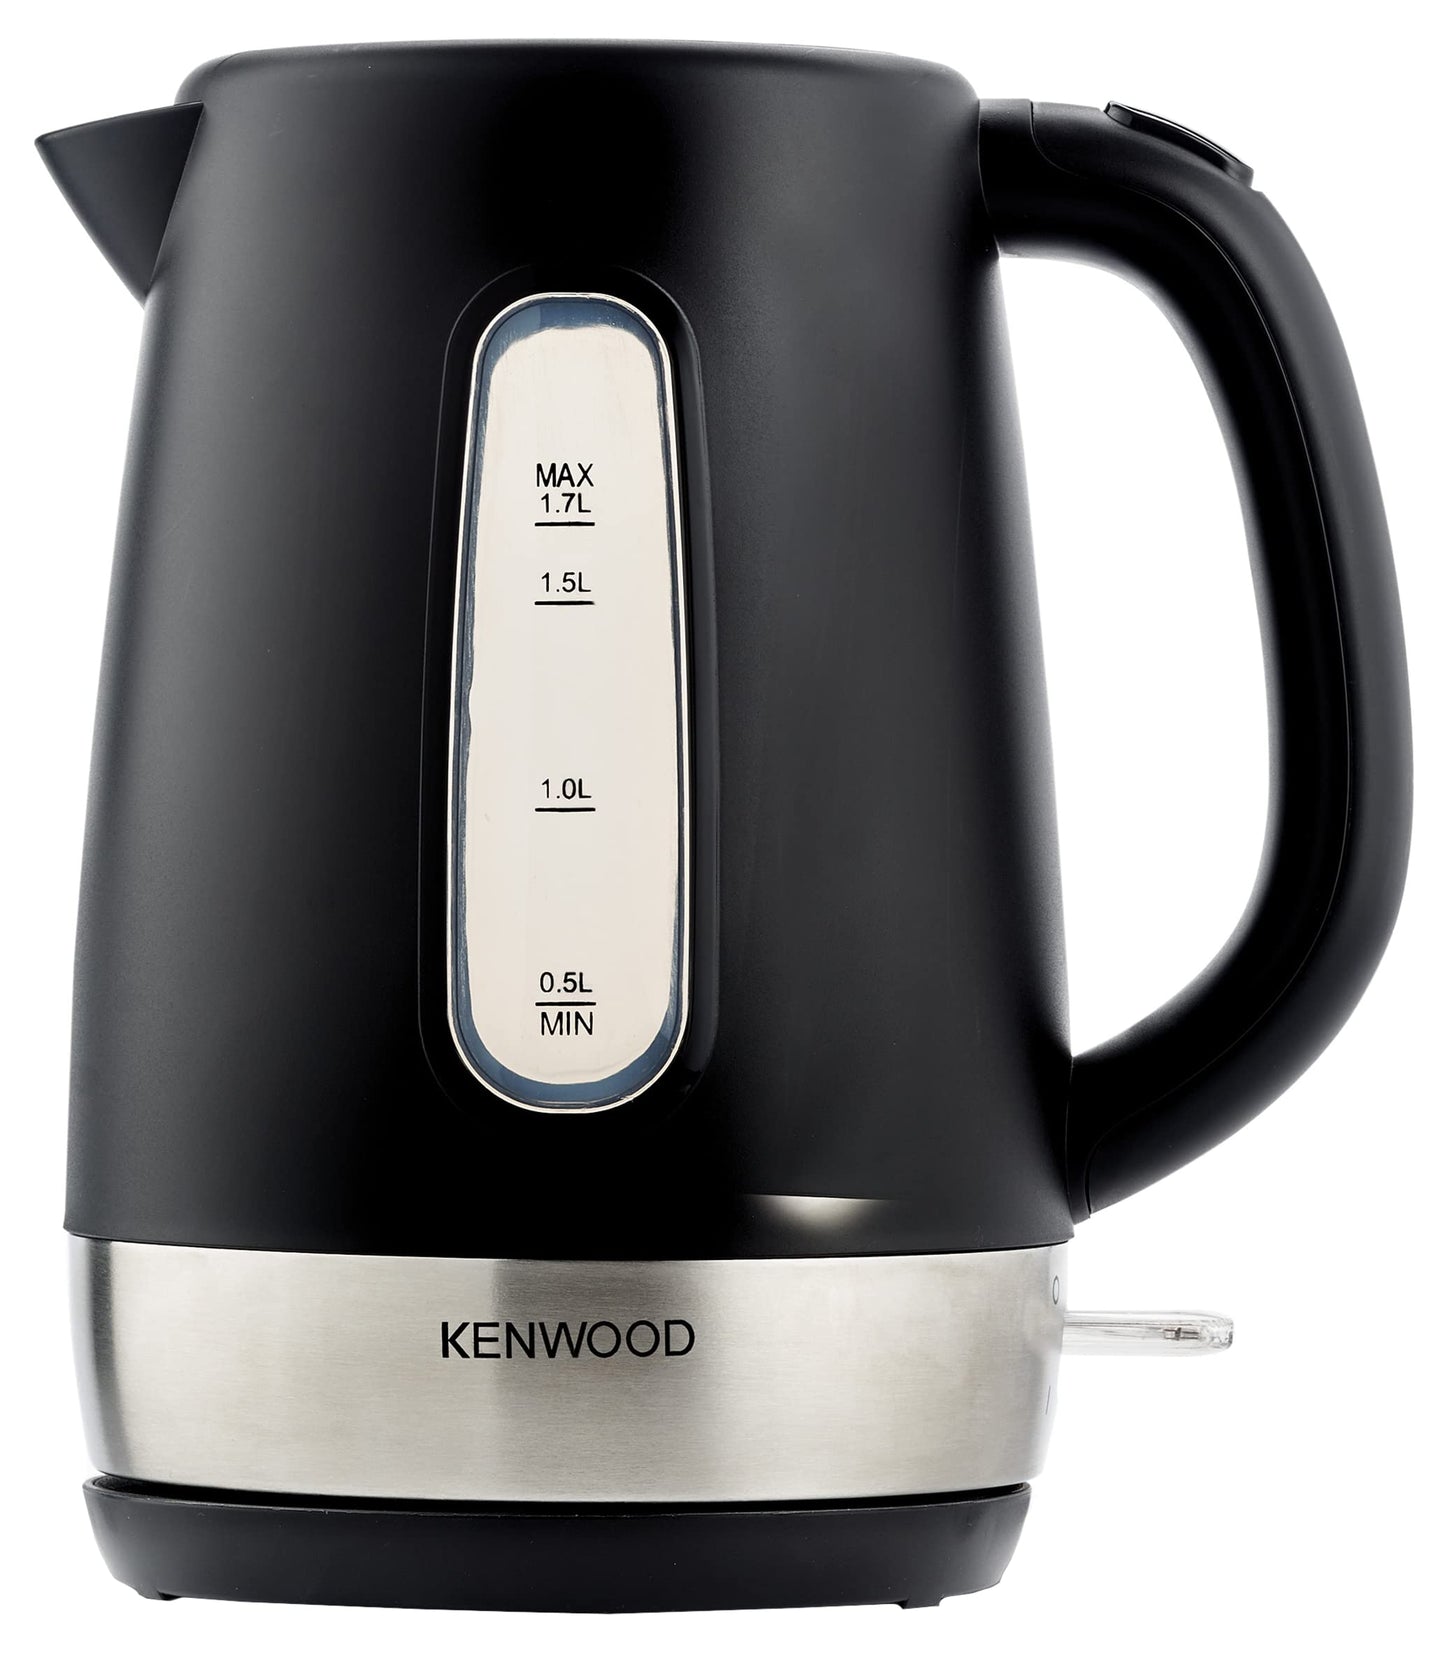 KENWOOD Kettle 1.7L Cordless Electric Kettle 2200W with Auto Shut-Off & Removable Mesh Filter ZJP01.A0BK Black/Silver